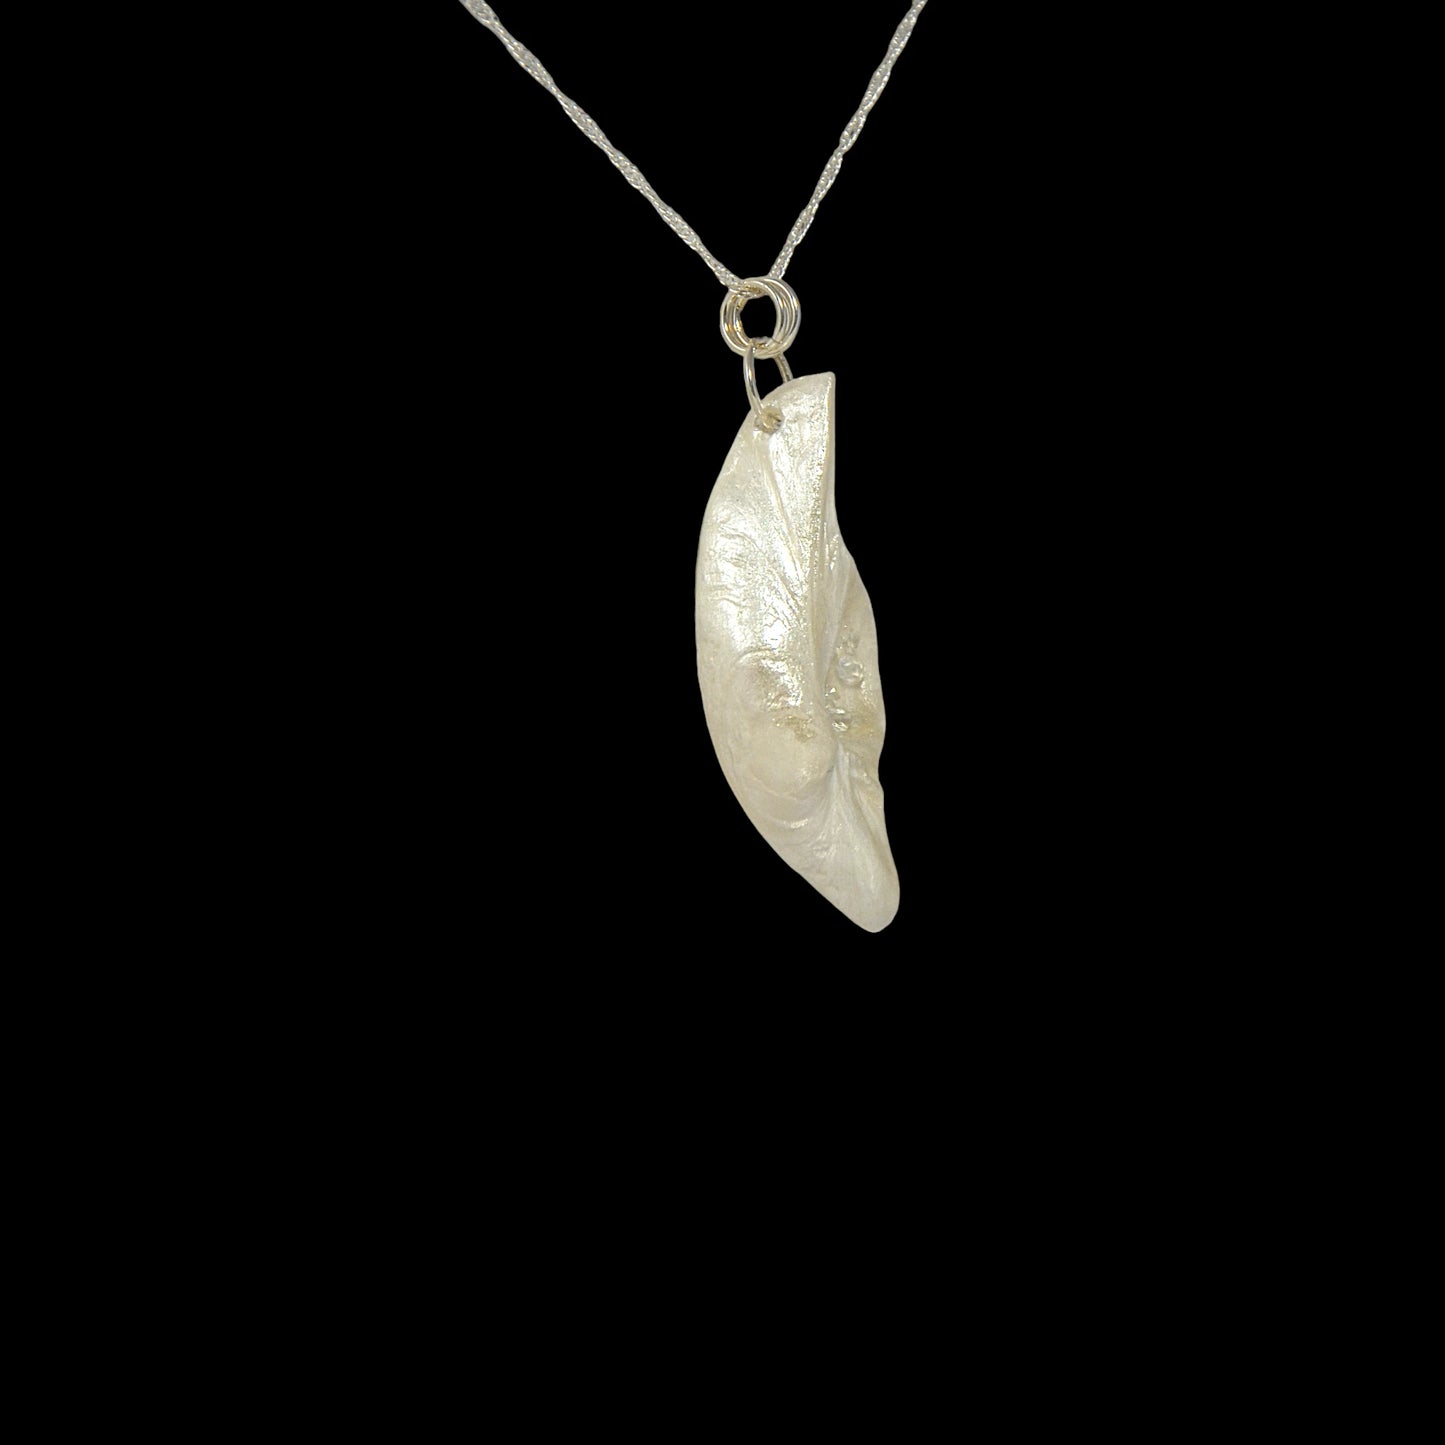 Beautiful pendant called Clarity.  Clarity is a natural seashell from the beach of Vancouver island.with seven herkimer diamonds. The pendant is turned to show the viewer the right side of the pendant.  The background is black.